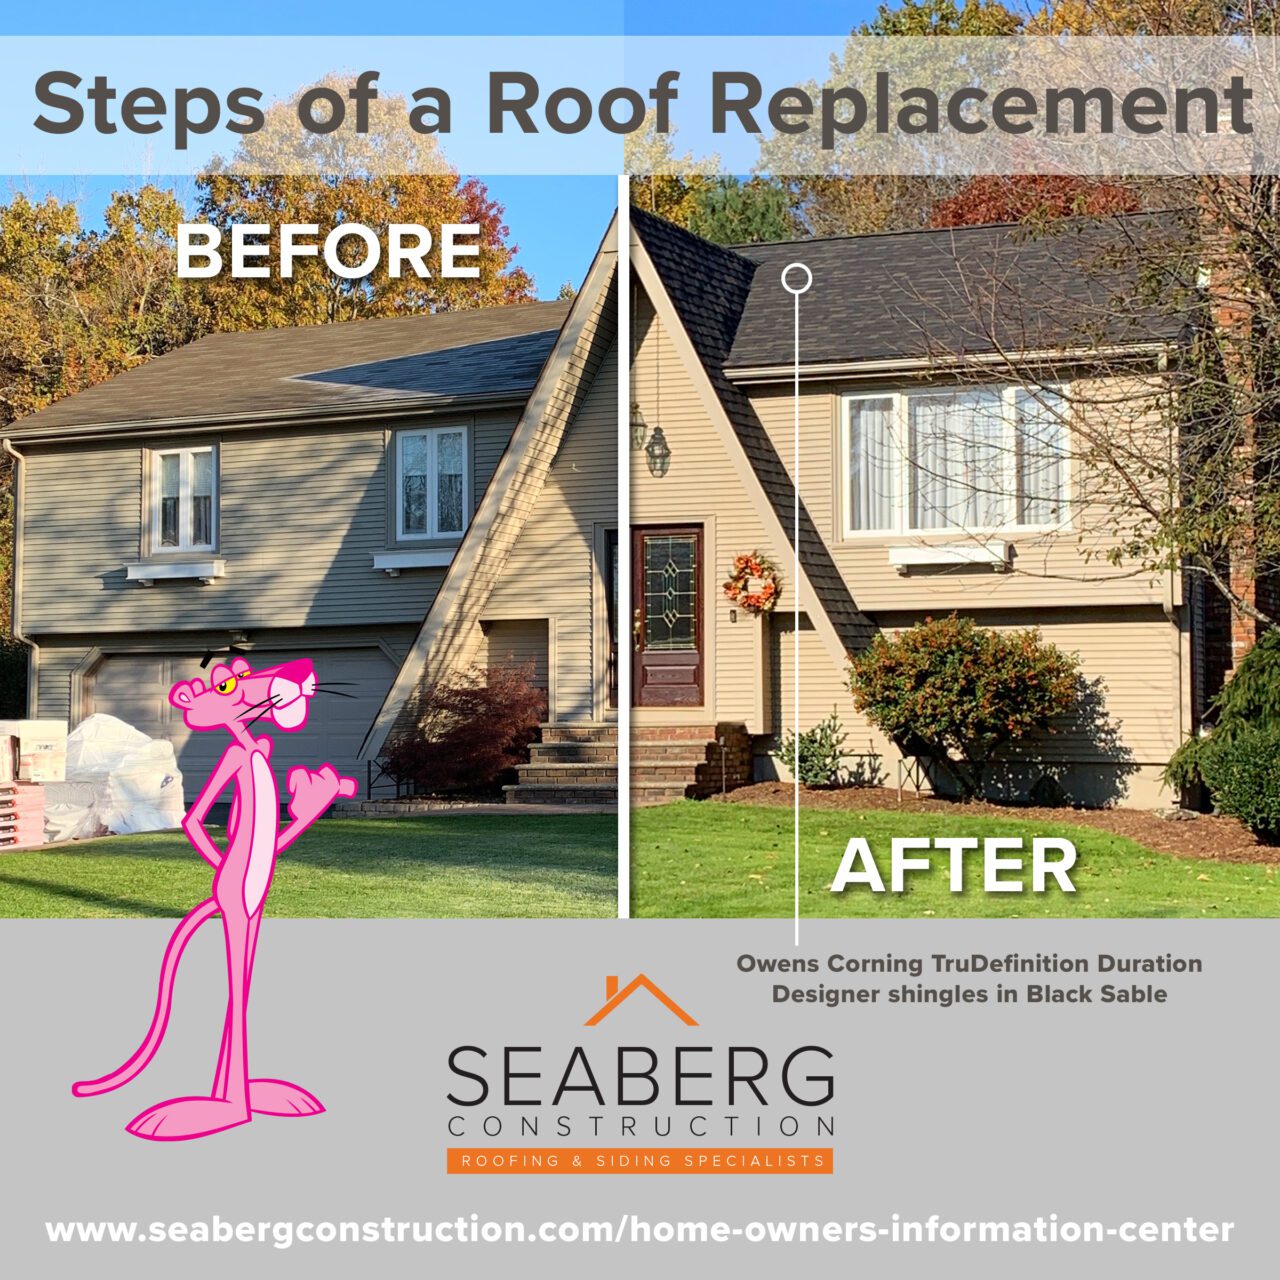 Seaberg Construction Blog: Steps of a Roof Replacement